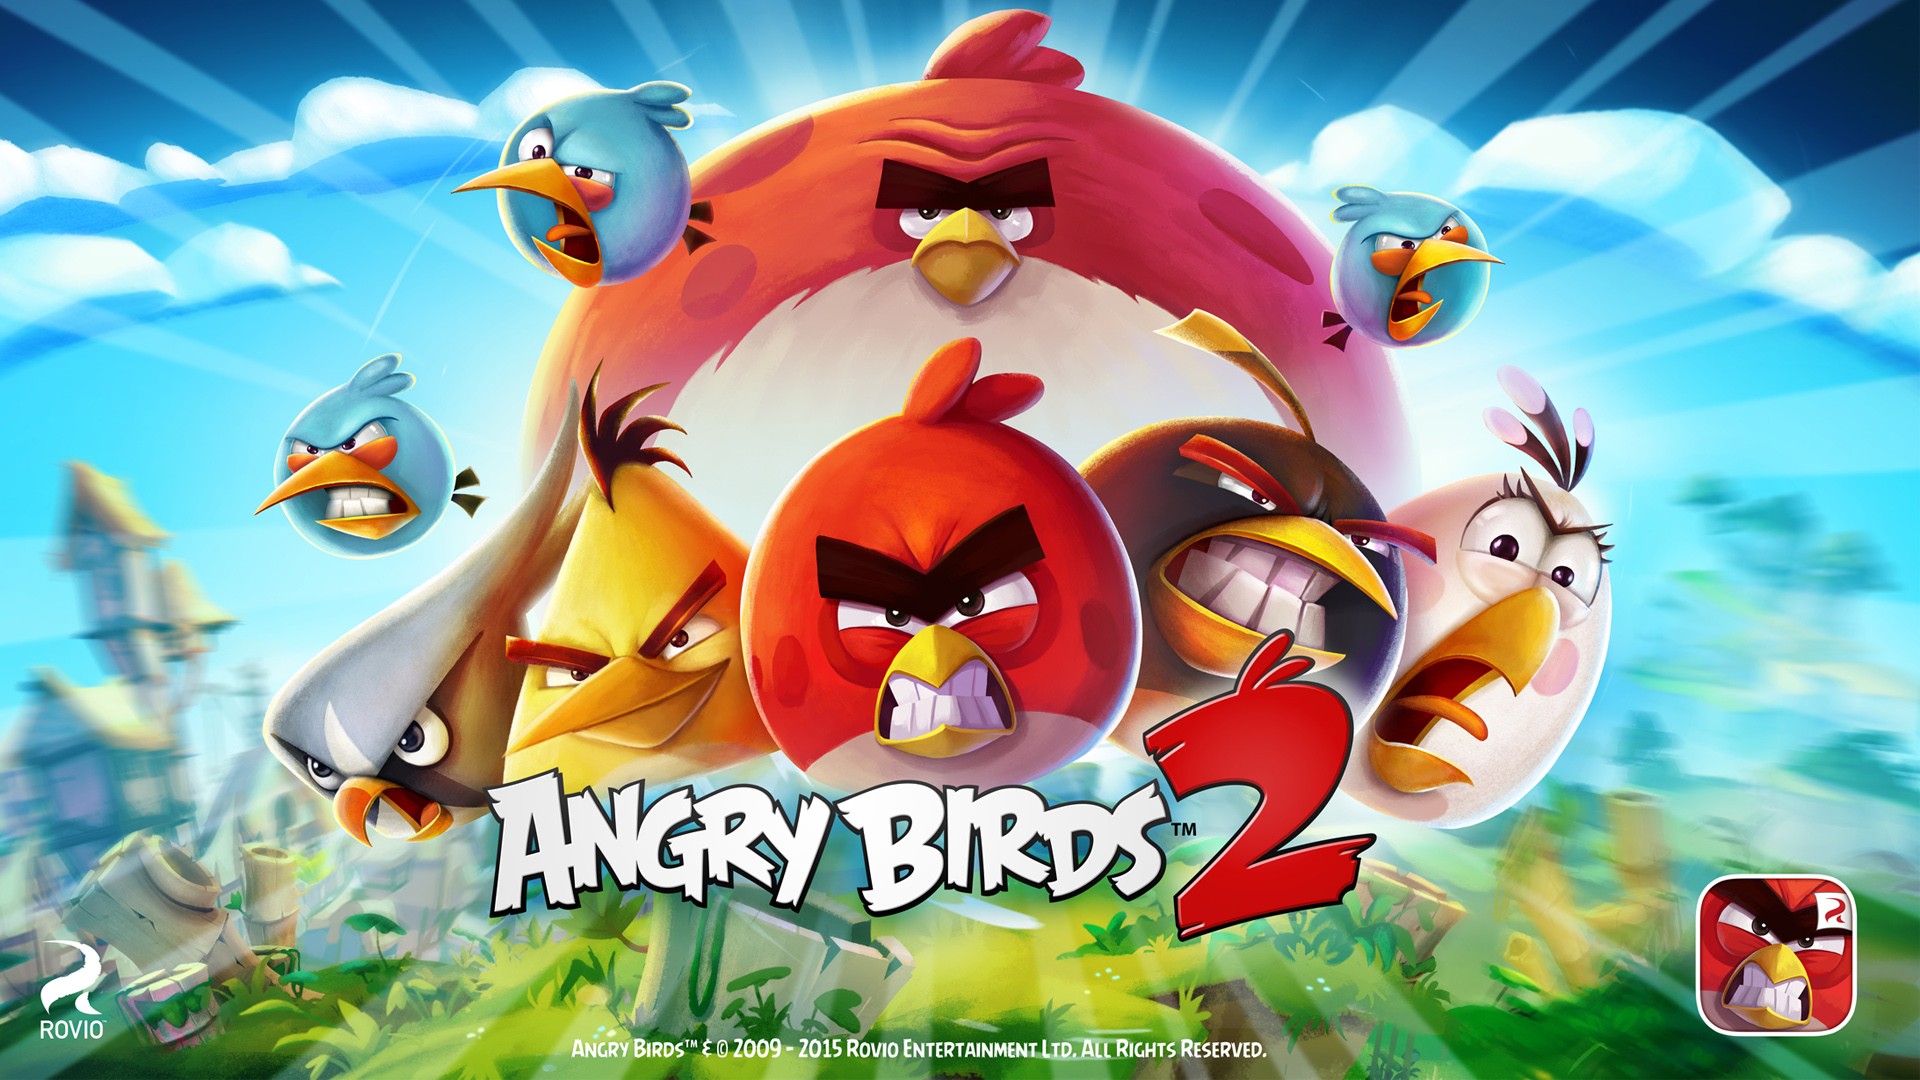 Download Angry Birds Game For Android 2.2